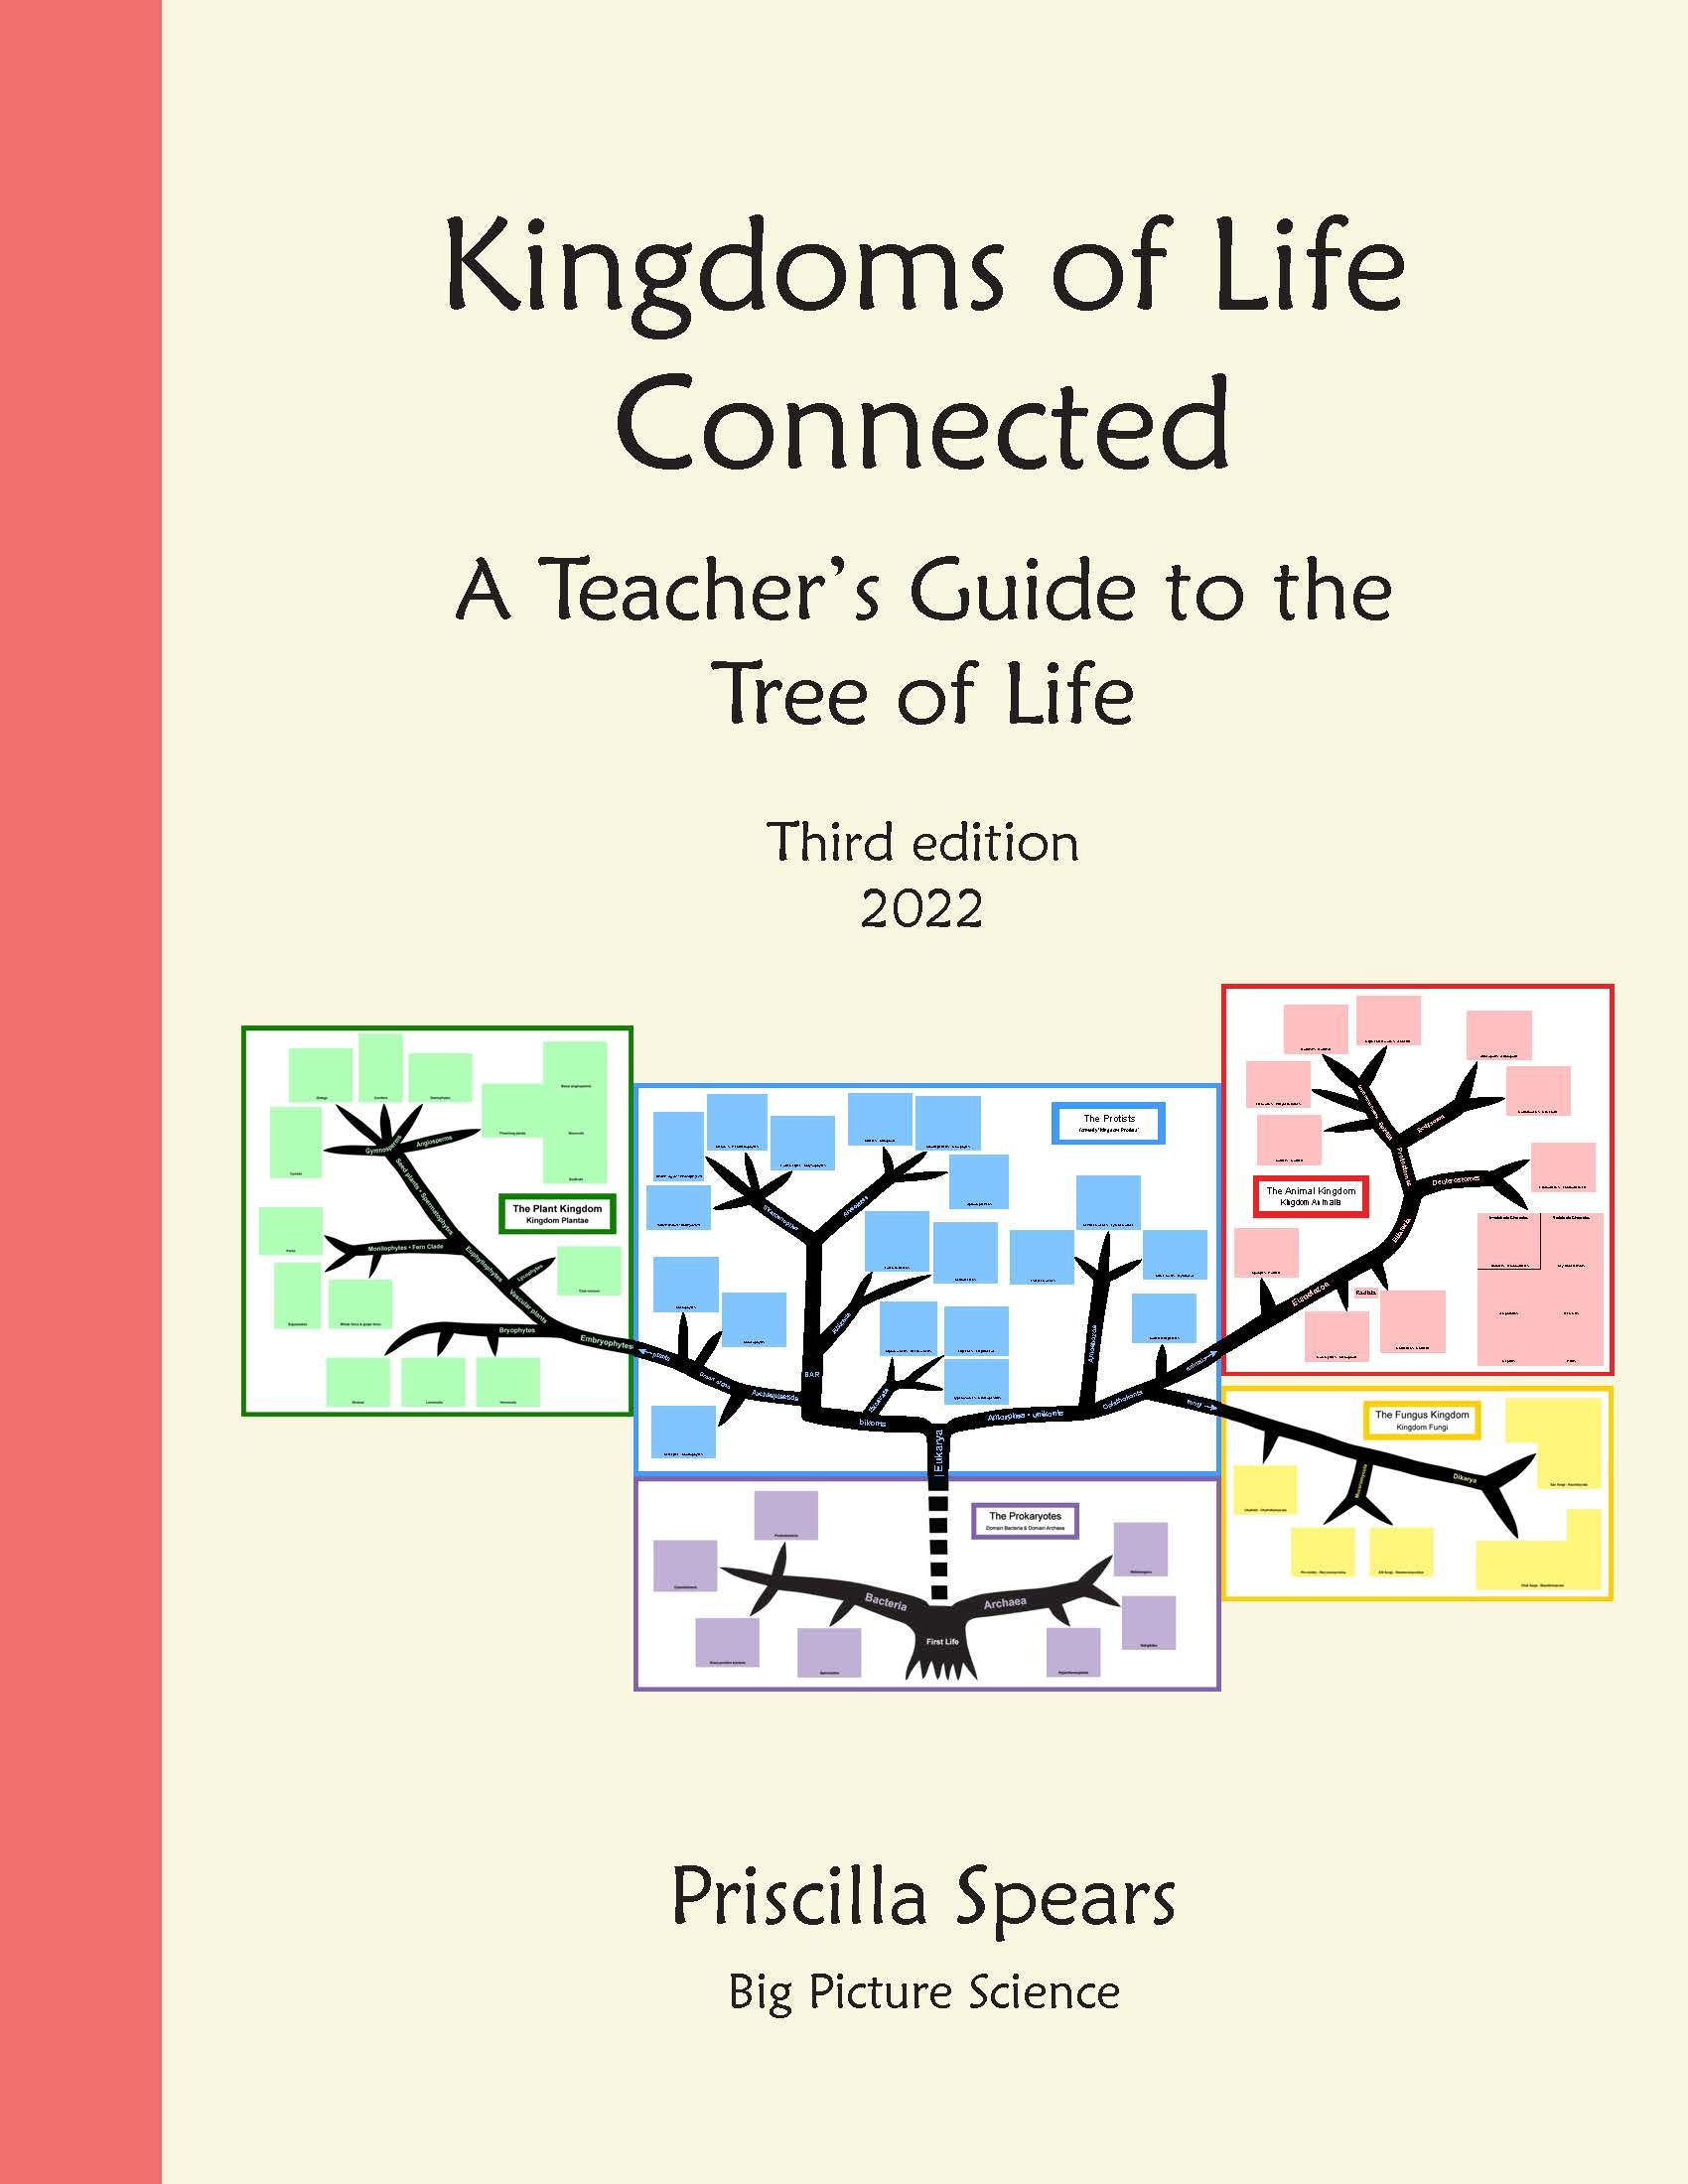 Kingdoms of Life Connected, third edition